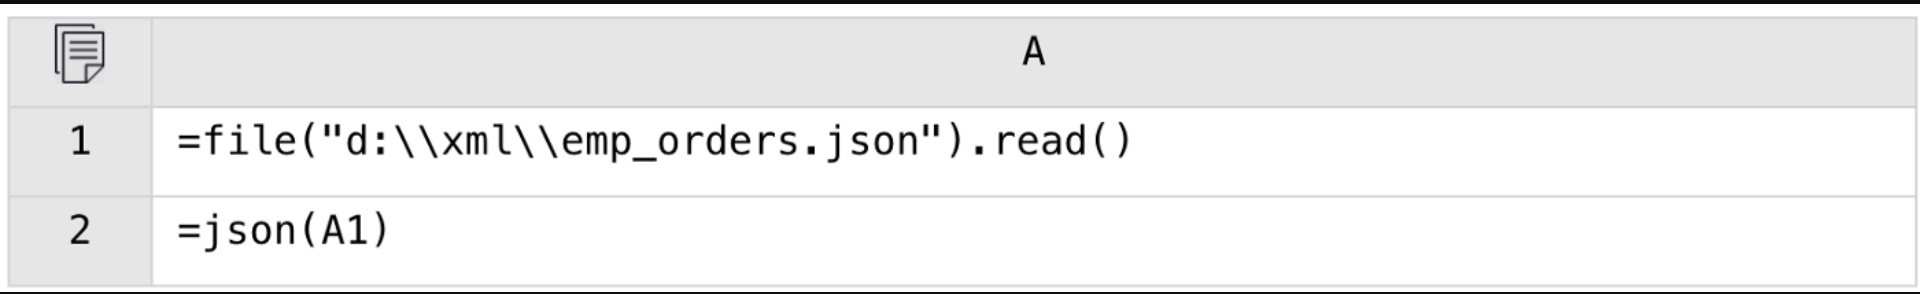 Ex: how to read the hierarchical JSON string from a file and parse it